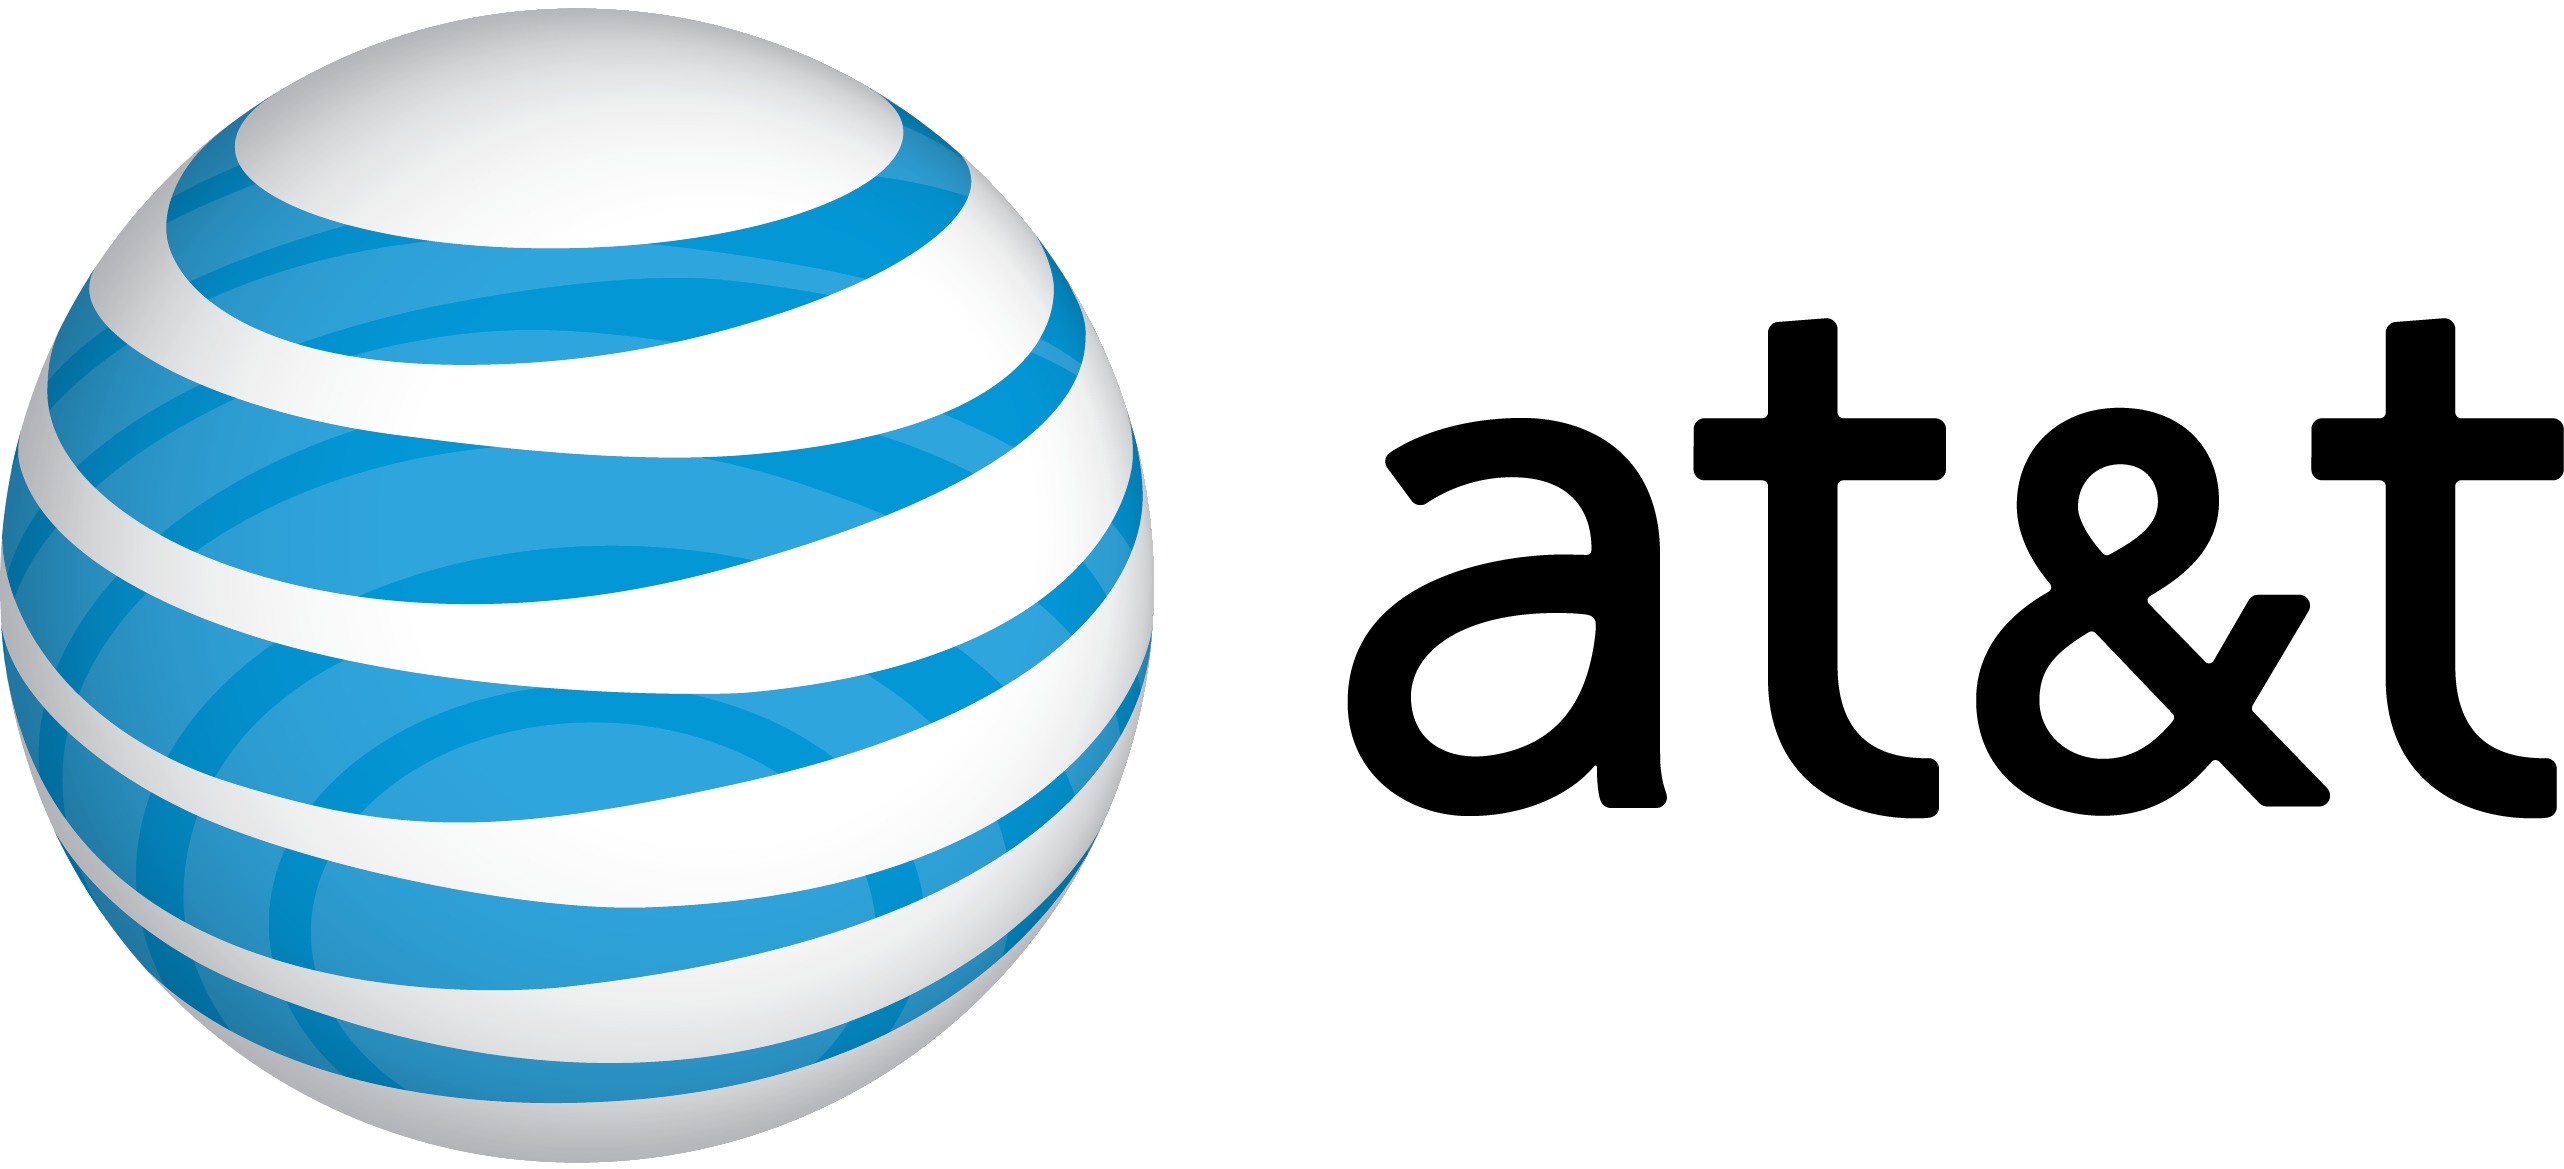 Whitacre Ibm Telephone Directv Iphone At&T Tower PNG Image